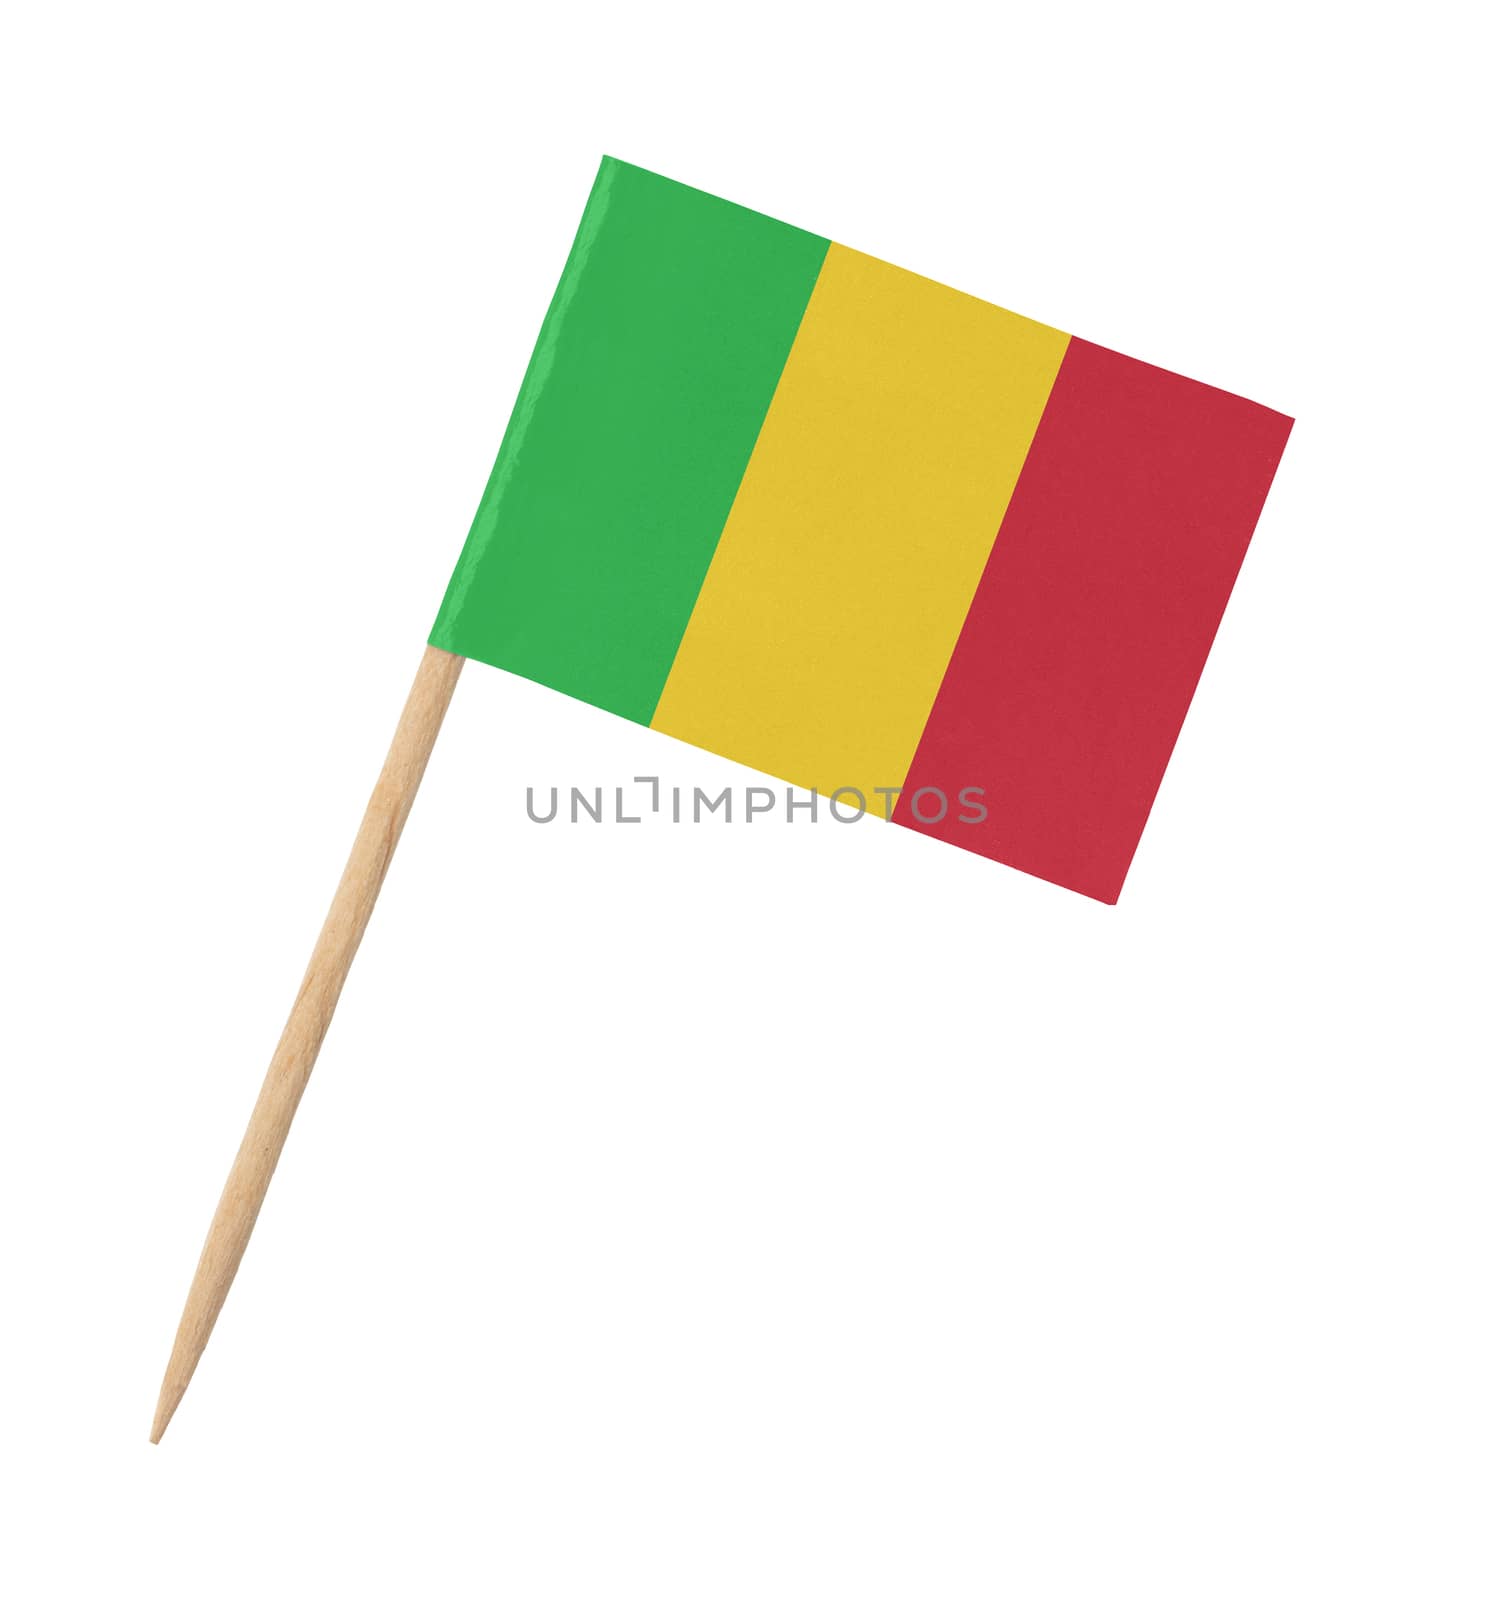 Small paper flag of Mali on wooden stick, isolated on white